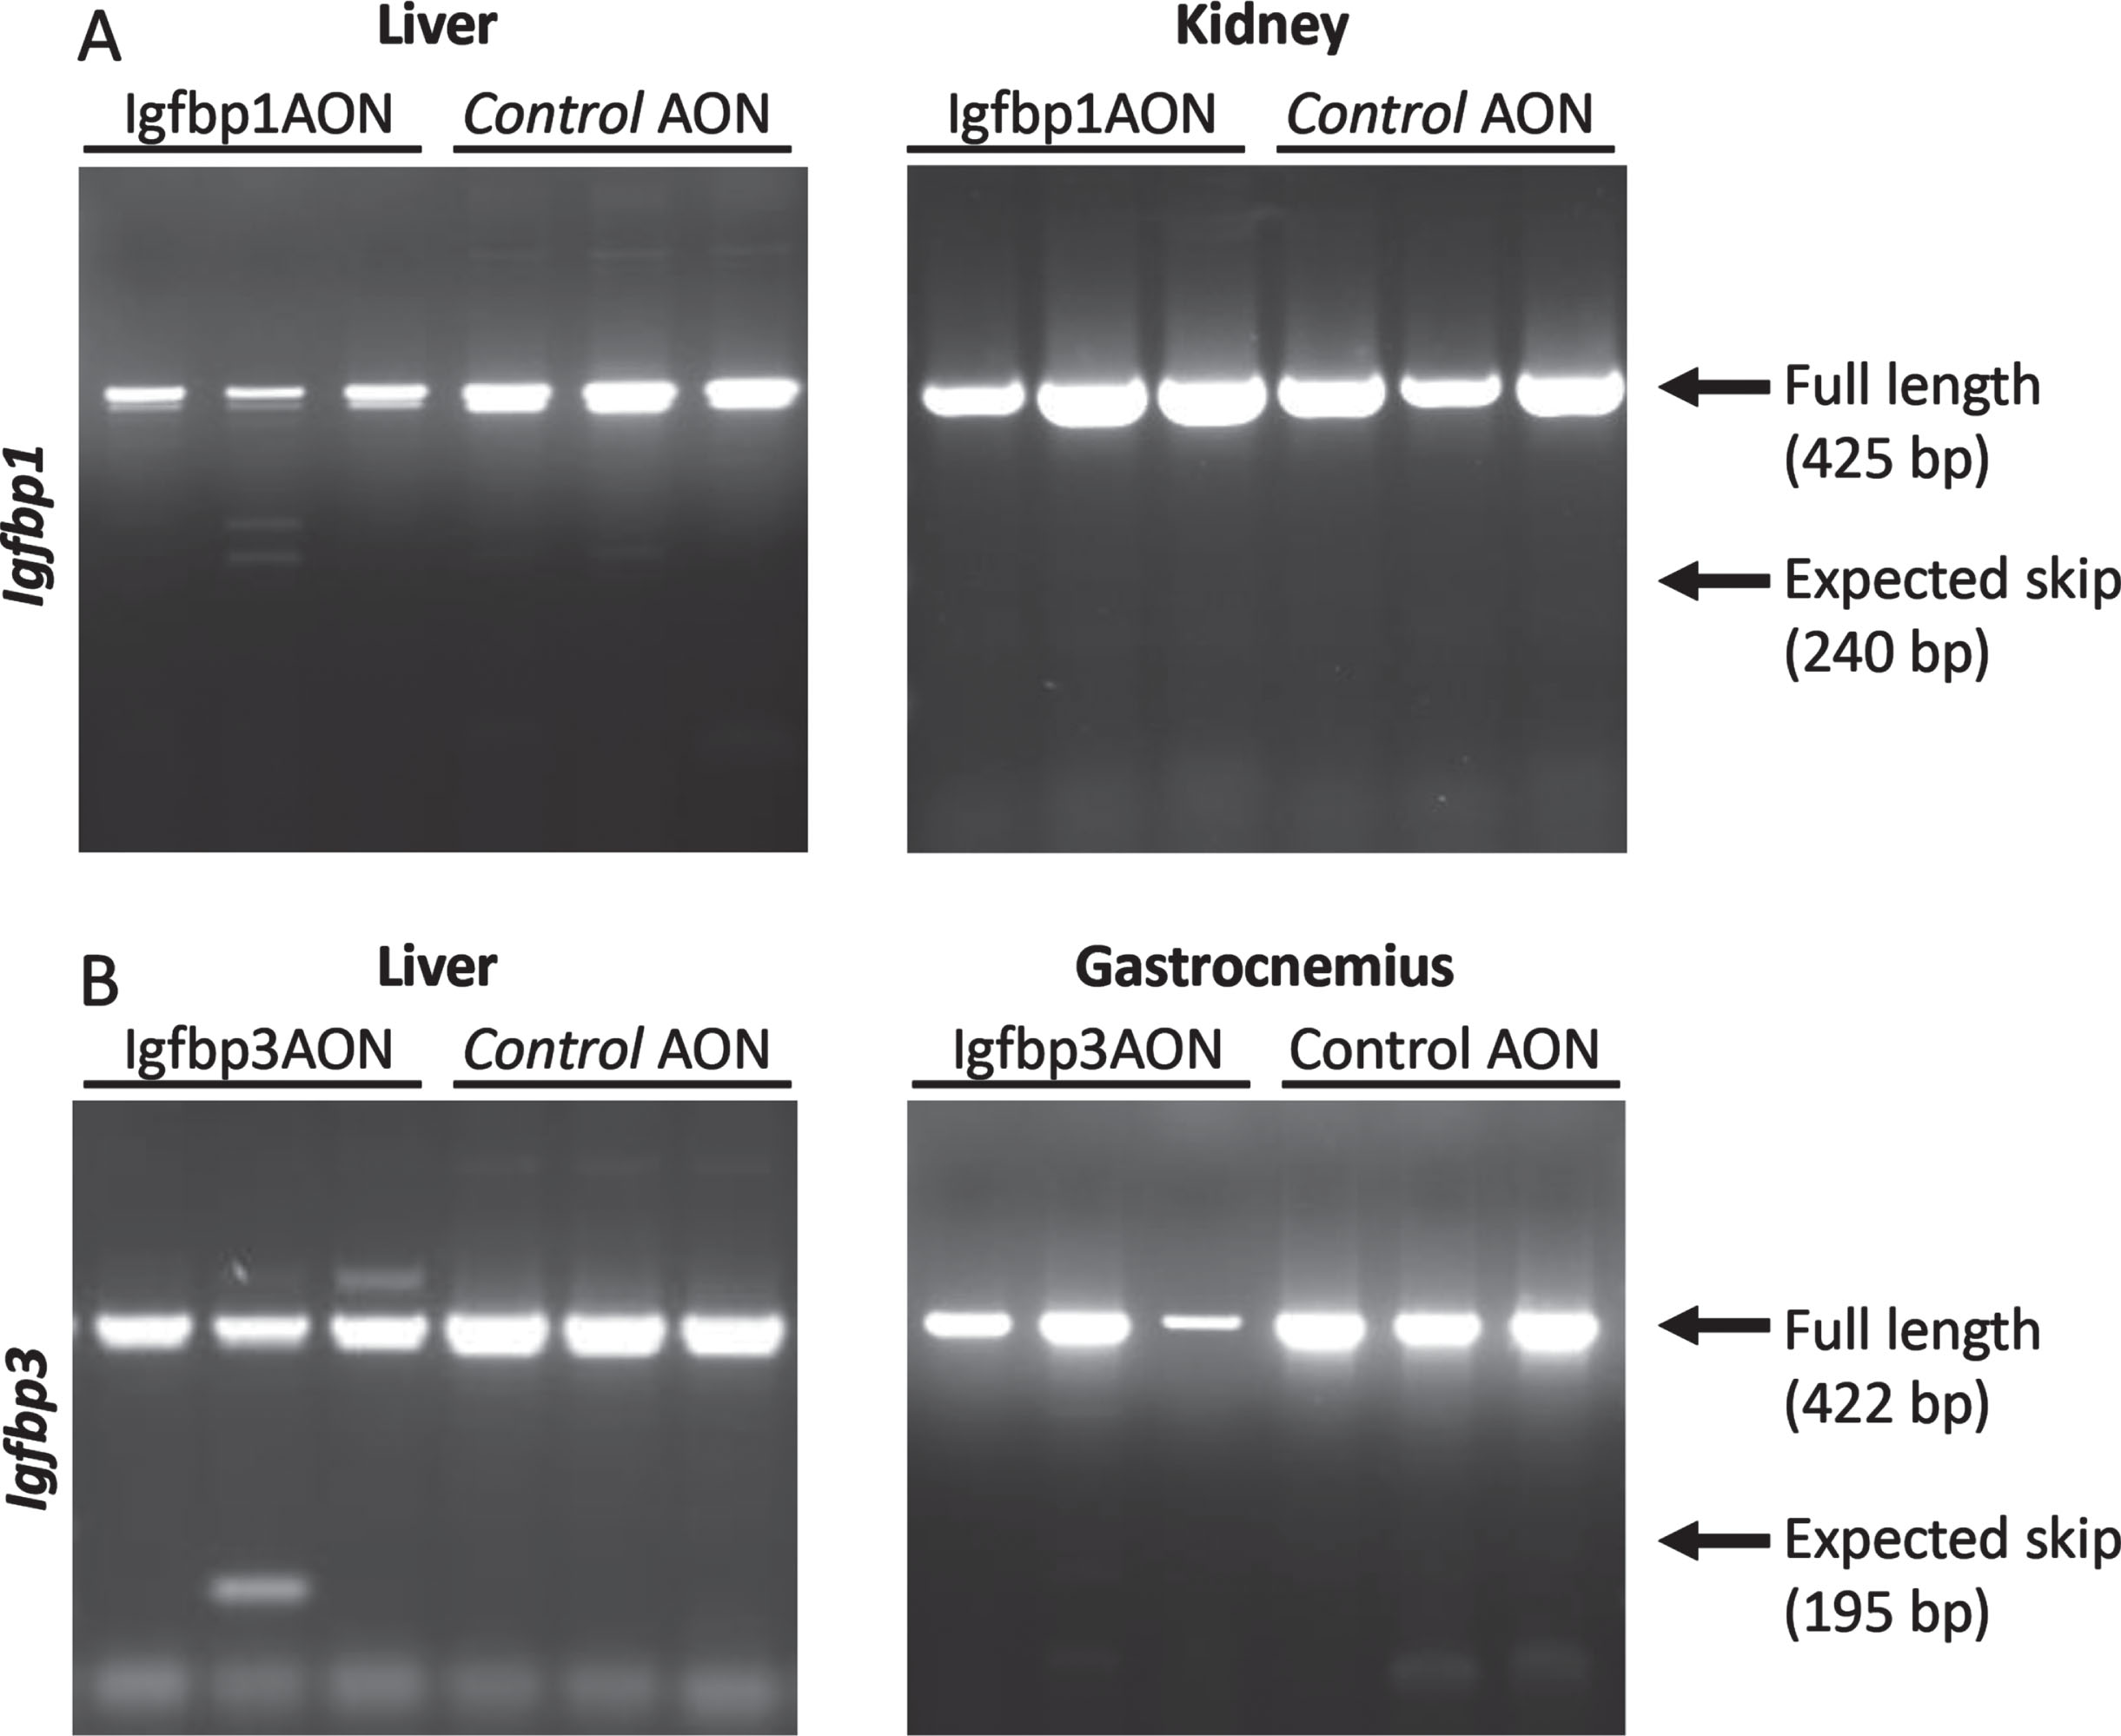 RT-PCR assessment of exon 2 skipping in Igfbp1 (A) and Igfbp3 (B). The arrows on the gel correspond to full length (non-skipped) and expected skip PCR products. No skipped products were detected.